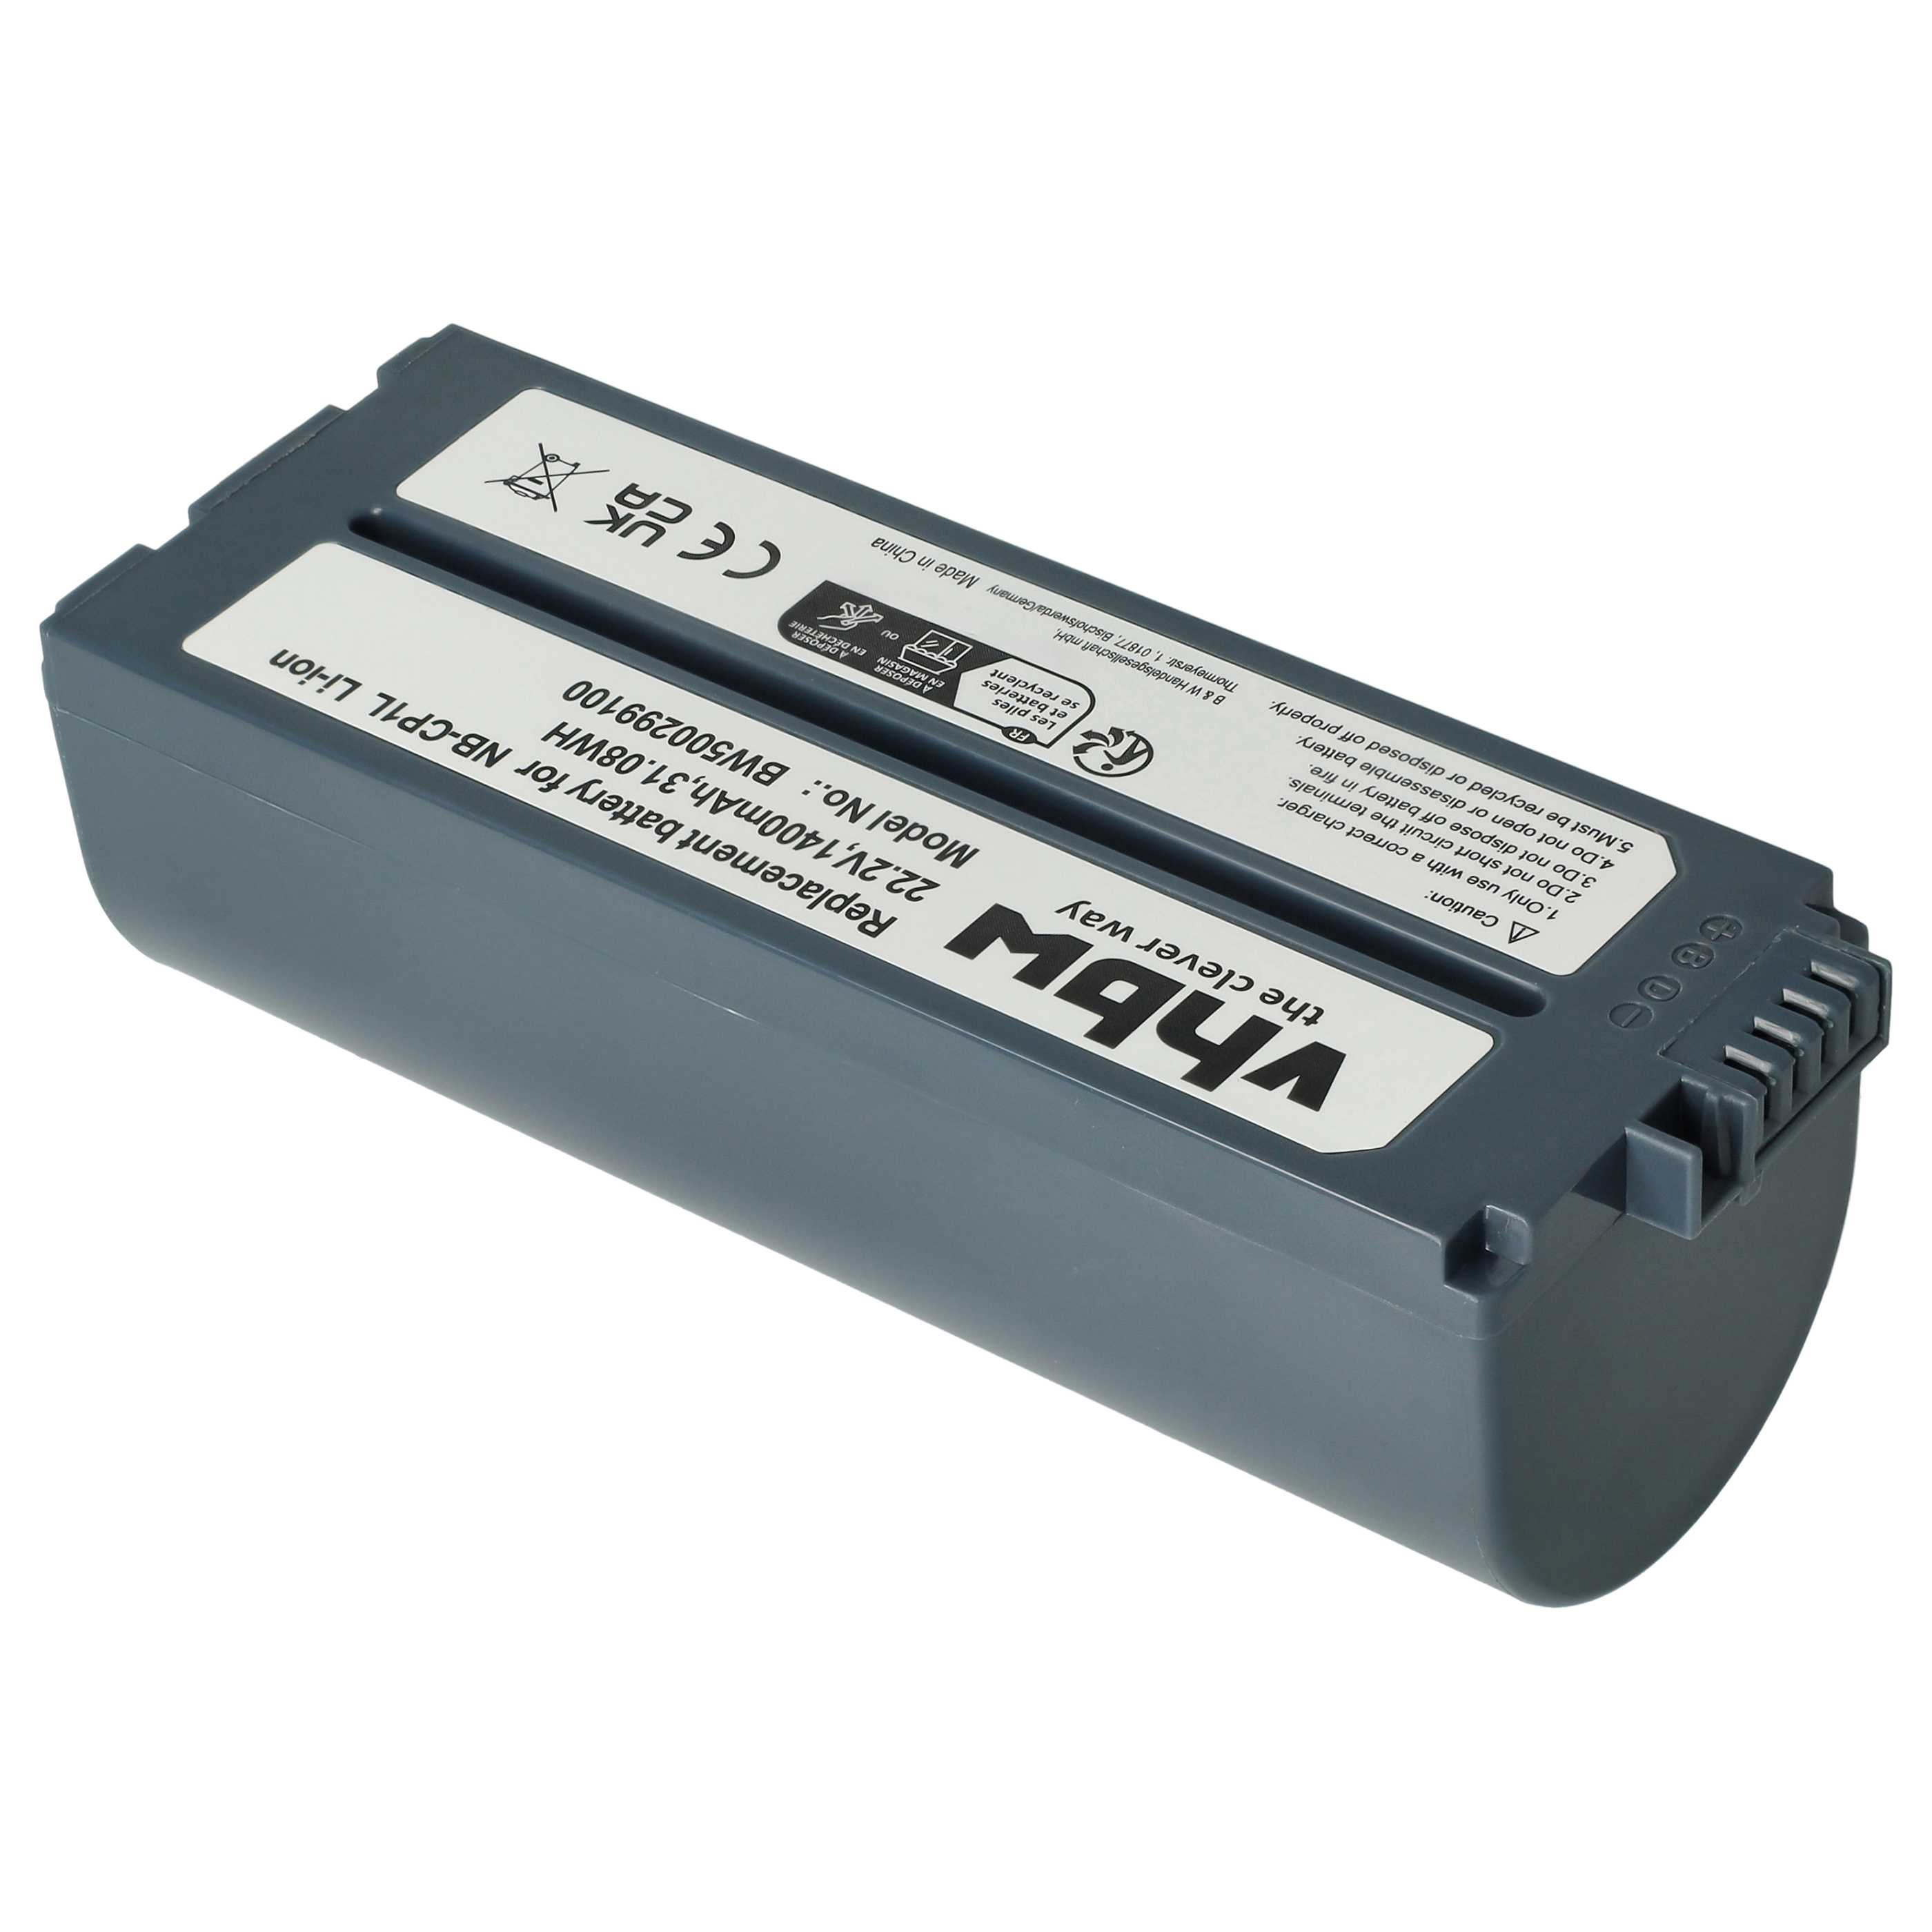 Printer Battery Replacement for Canon - 1400mAh 22.2V Li-Ion